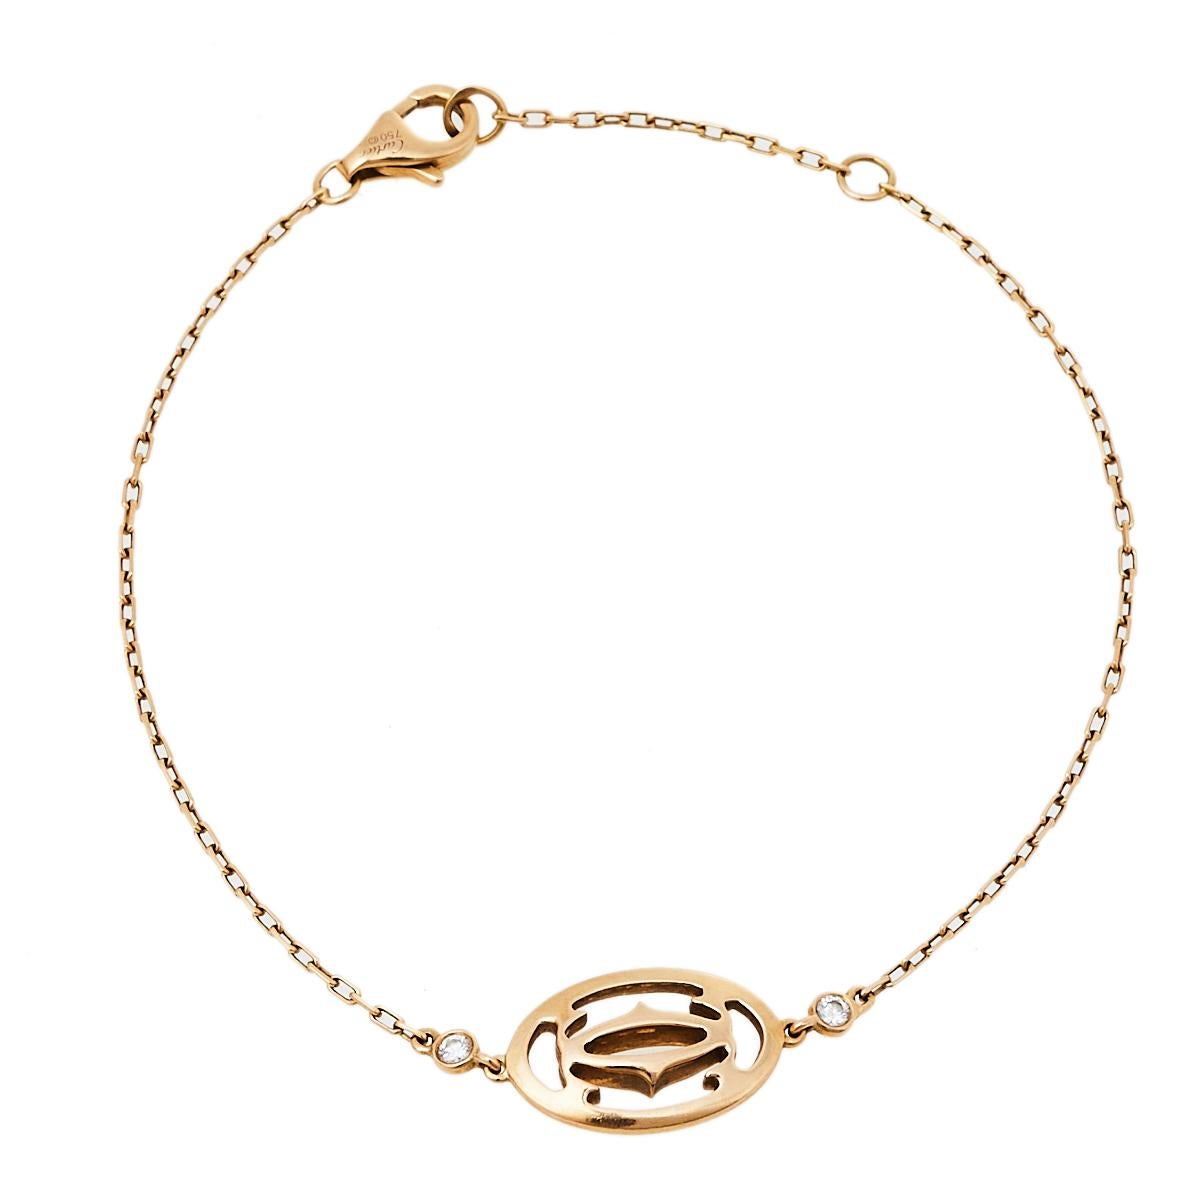 Picked from the “Logo Cartier” line, this bracelet carries the brand's iconic “double C” motif that was first used by Louis Cartier. The bracelet is formed using 18k rose gold and detailed with two diamonds stationed on each side of the